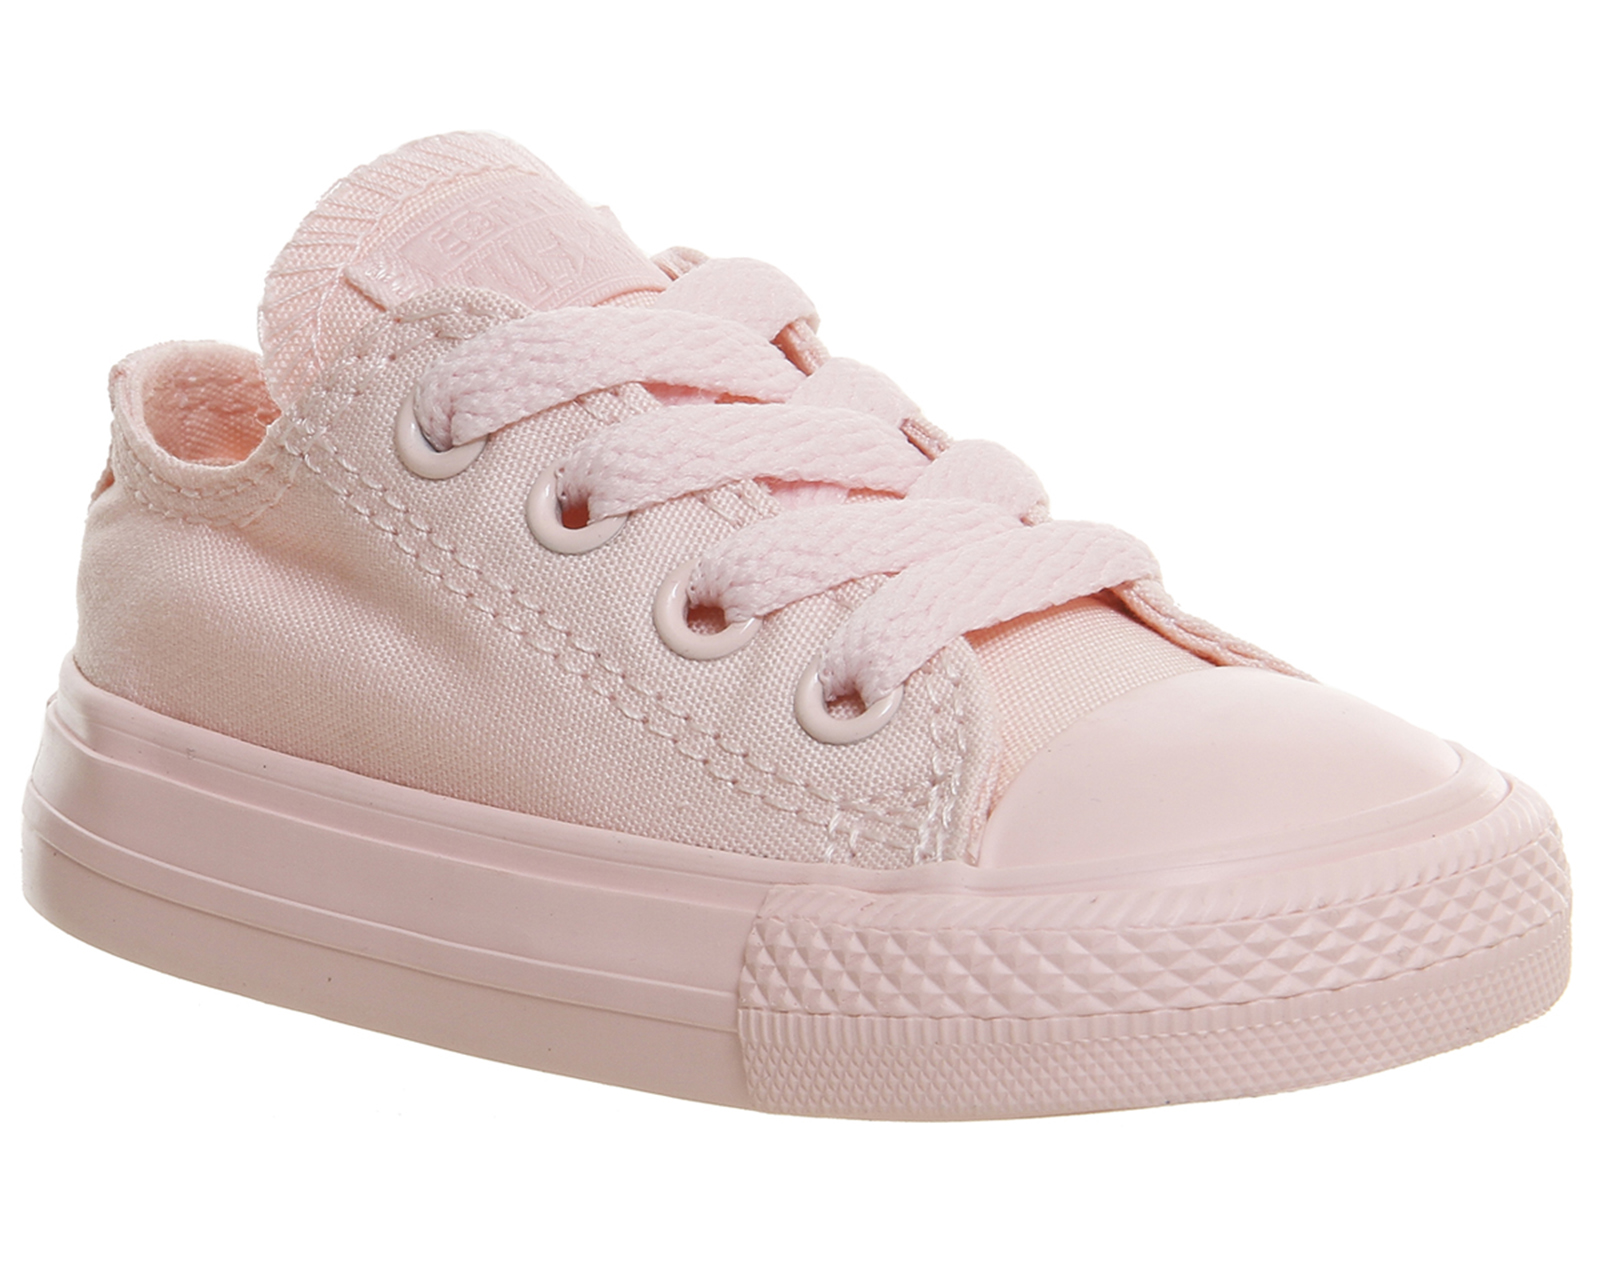 infant pink converse Online Shopping for Women, Men, Kids Fashion &  Lifestyle|Free Delivery & Returns! -